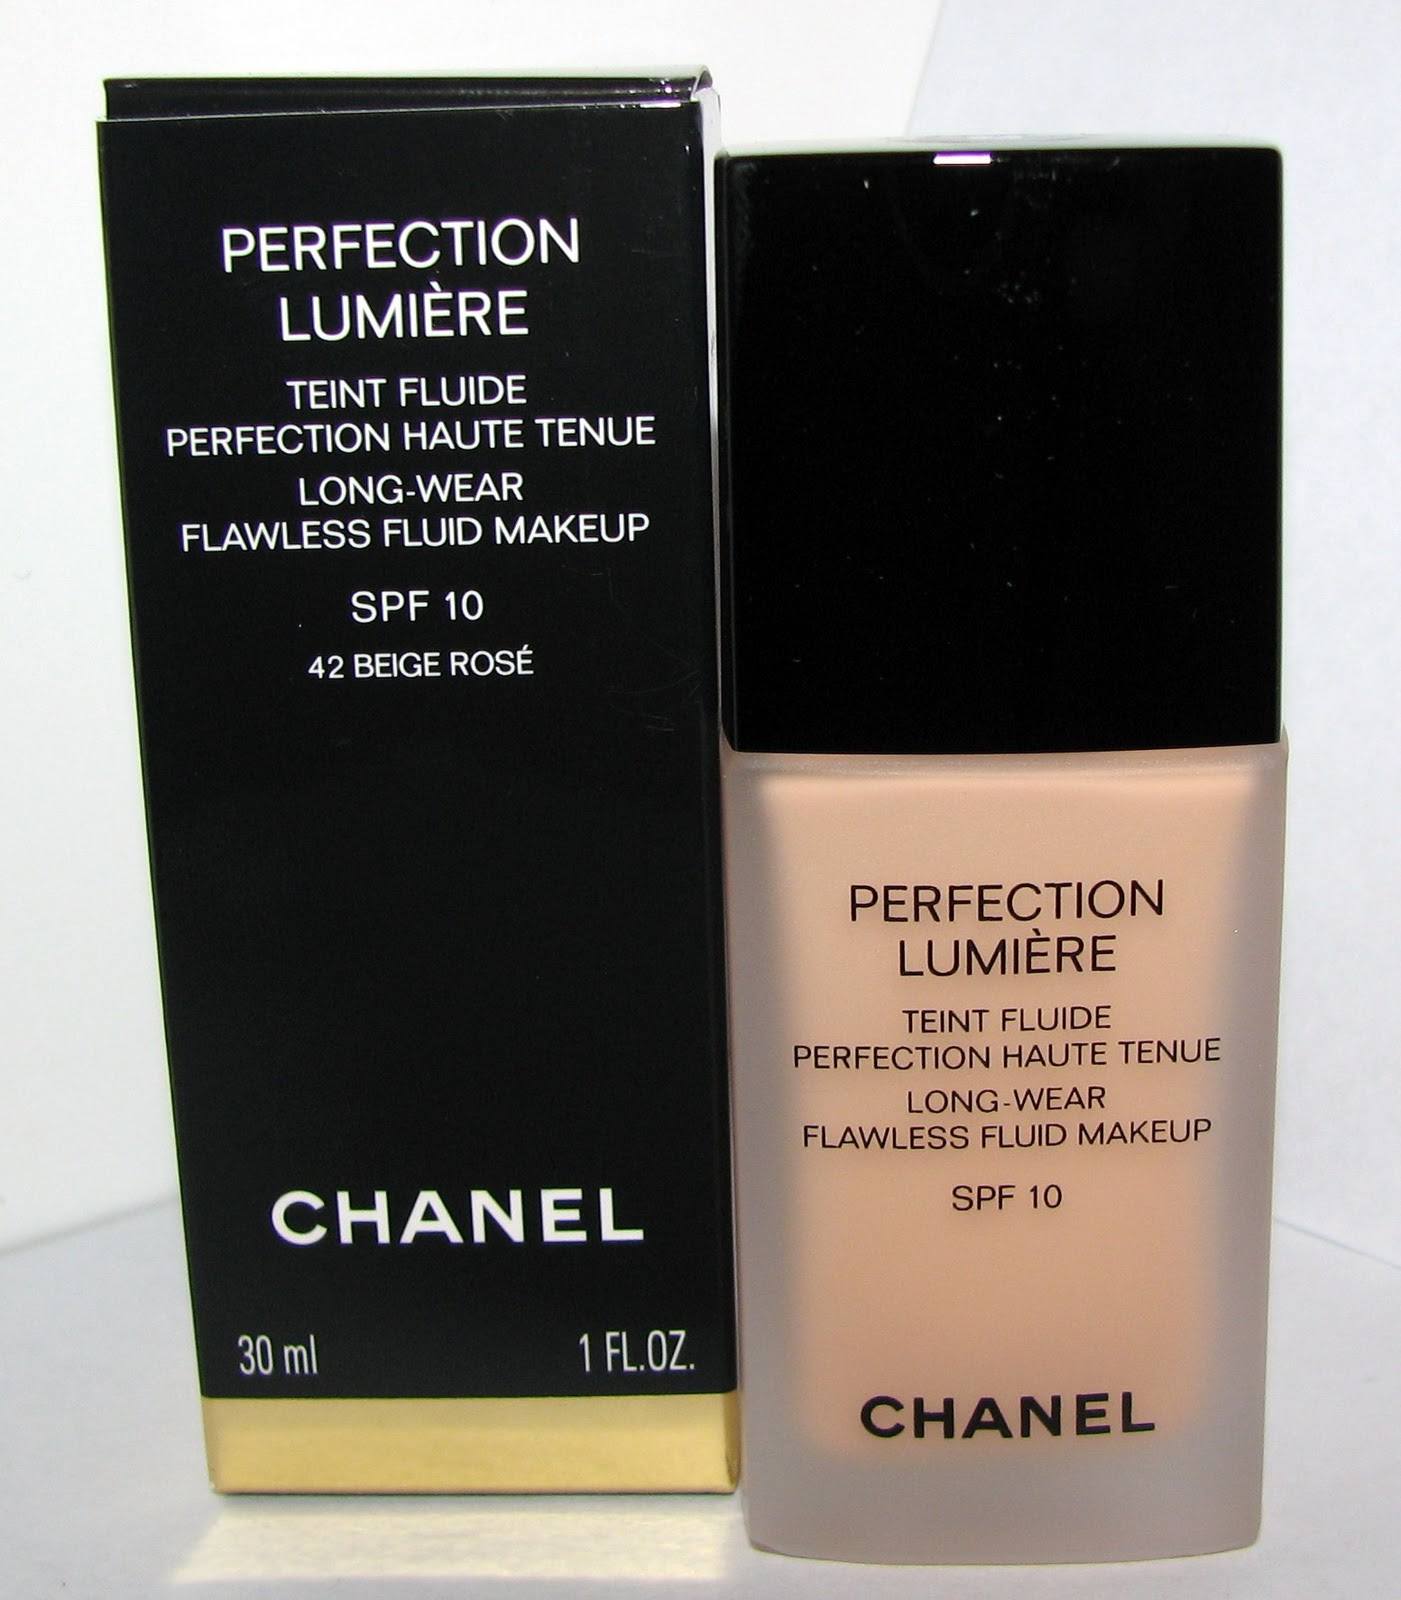 Blushing Noir: Chanel 42 BEIGE ROSE Perfection Lumiere Flawless Fluid Makeup  Swatches and Review